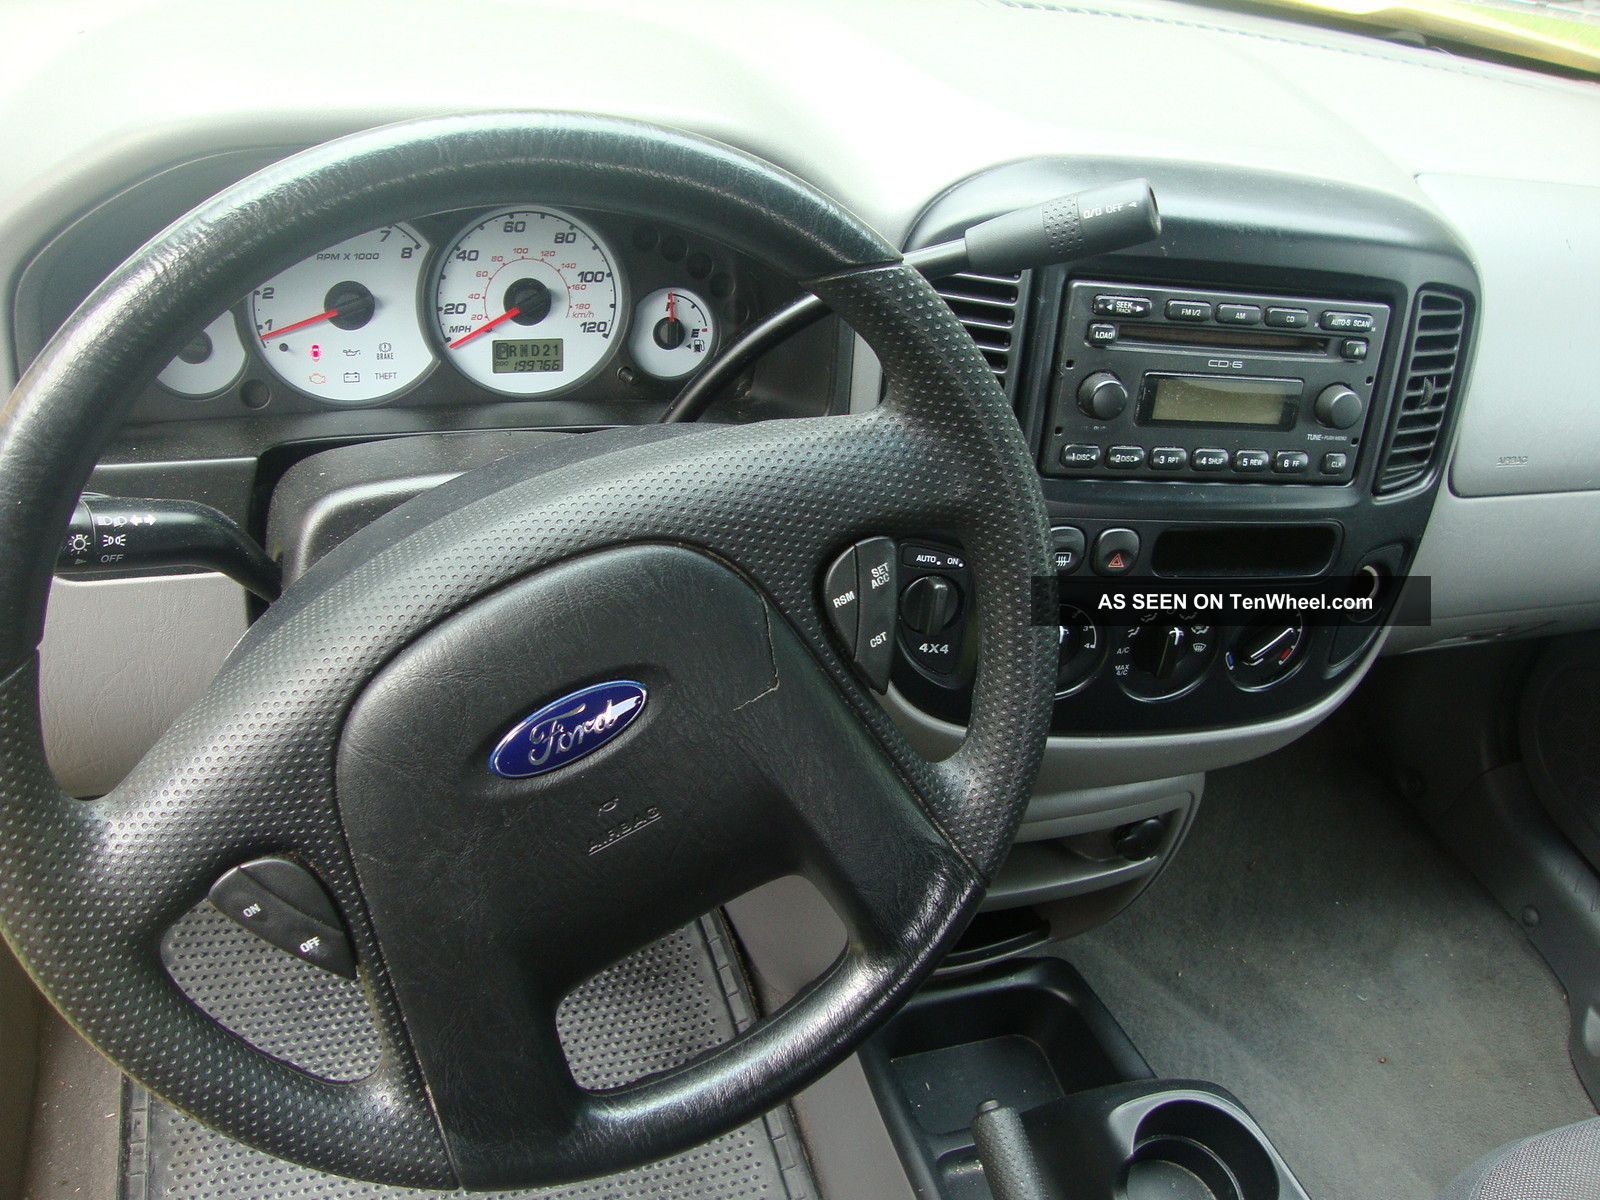 2001 Ford escape v6 towing capacity